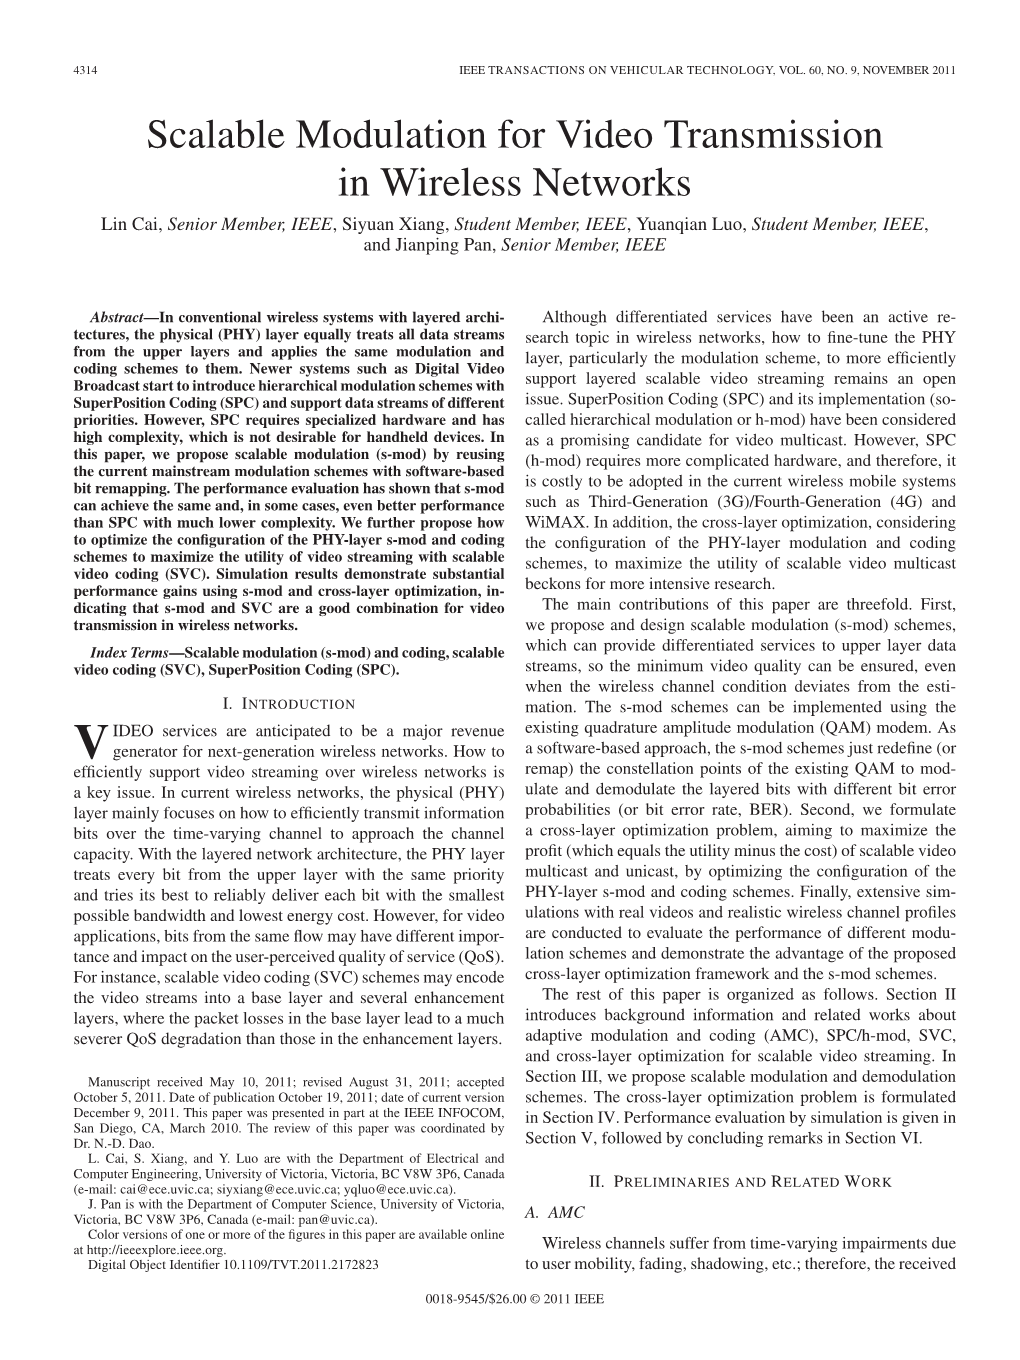 Scalable Modulation for Video Transmission in Wireless Networks